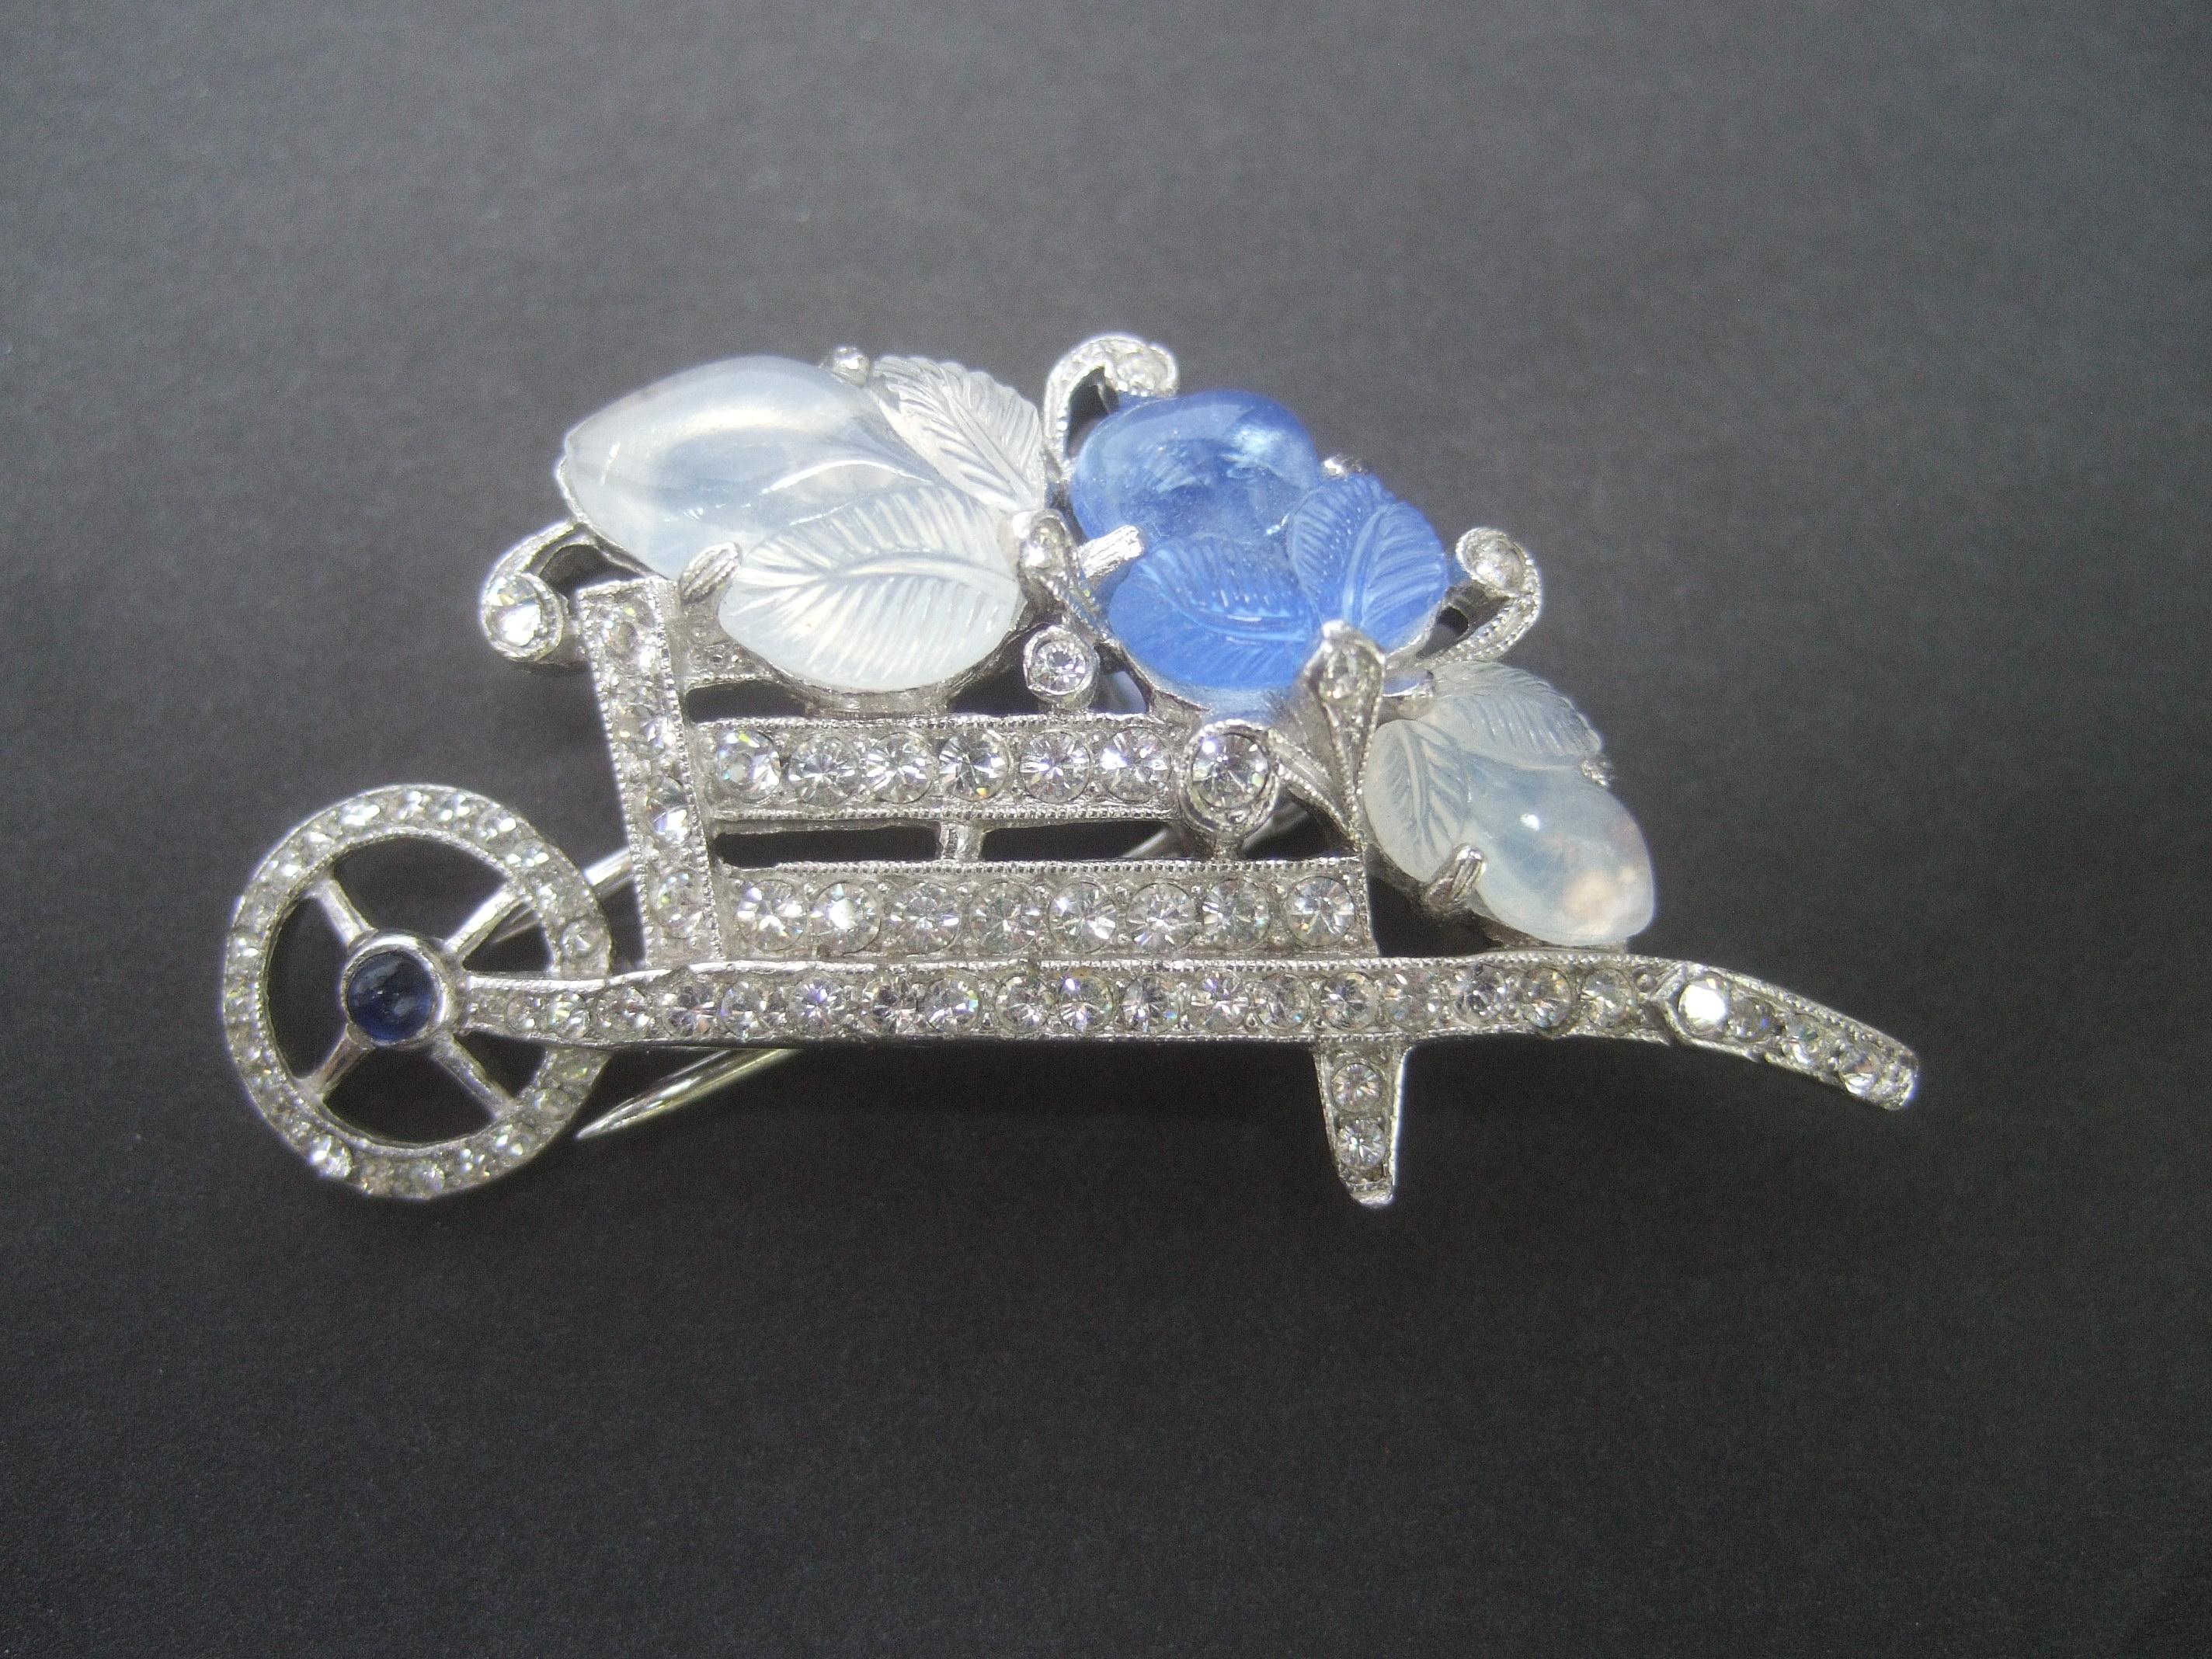 Trifari Art Deco Carved glass diamante crystal wheelbarrow brooch c 1940s

The elegant costume carved glass & diamante crystal brooch emulates precious French jewelry designs from the early 20th century

Alfred Phillipe's previous training in